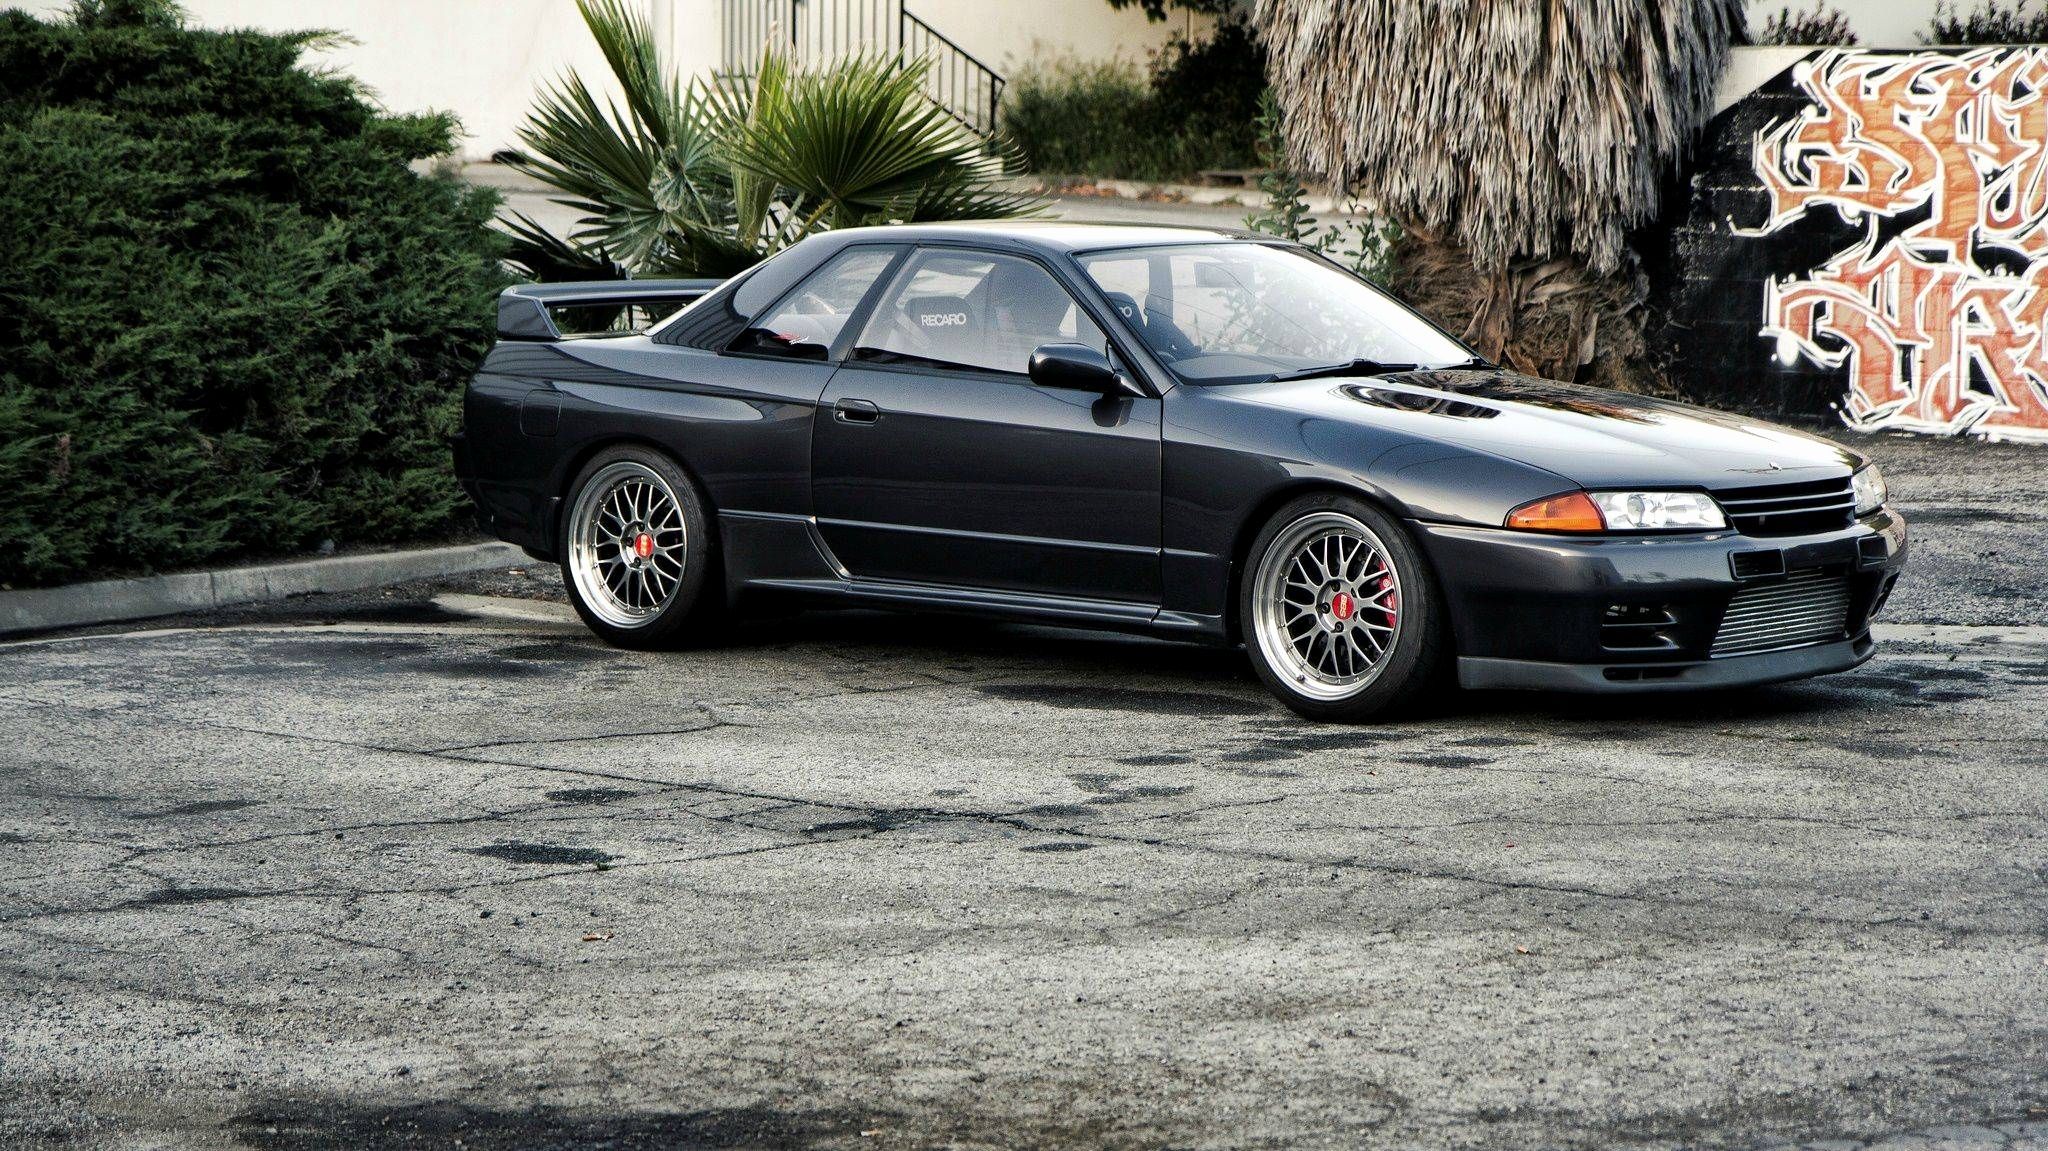 R32 Skyline Wallpaper Beautiful Skyline R32 Wallpaper Of the Day of The Hudson